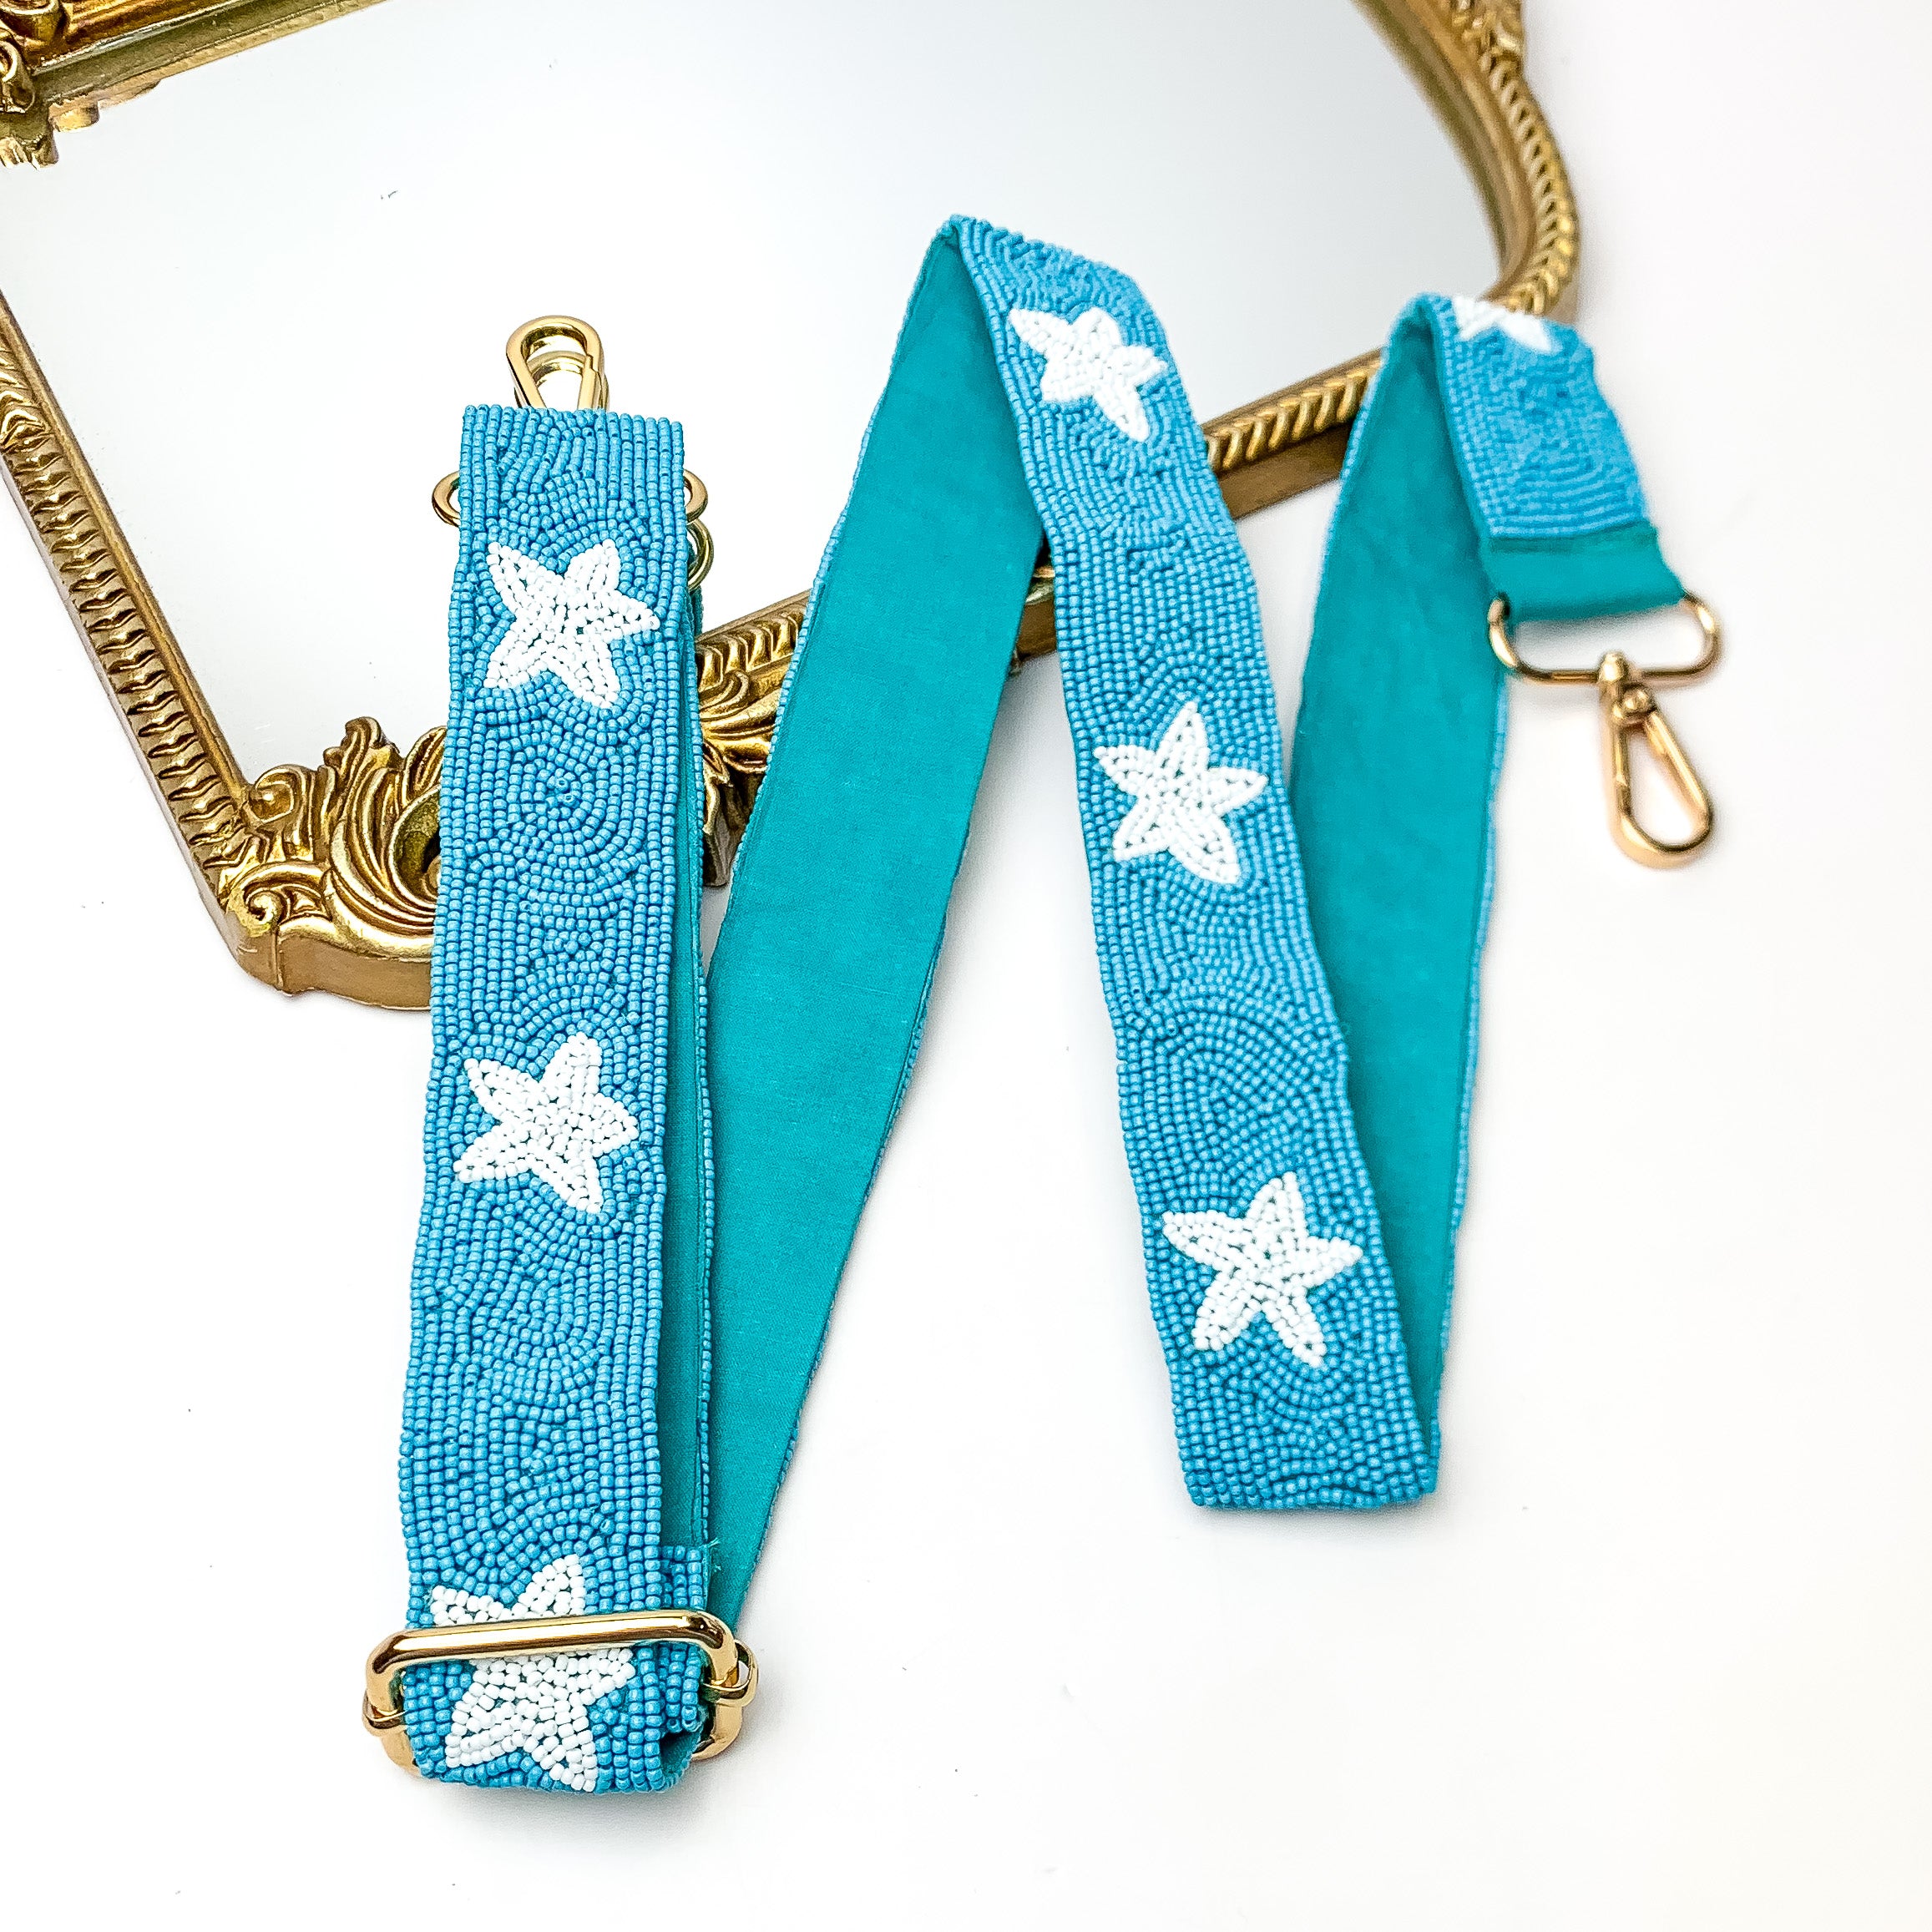 Star of the Show Beaded Adjustable Purse Strap in Blue and White